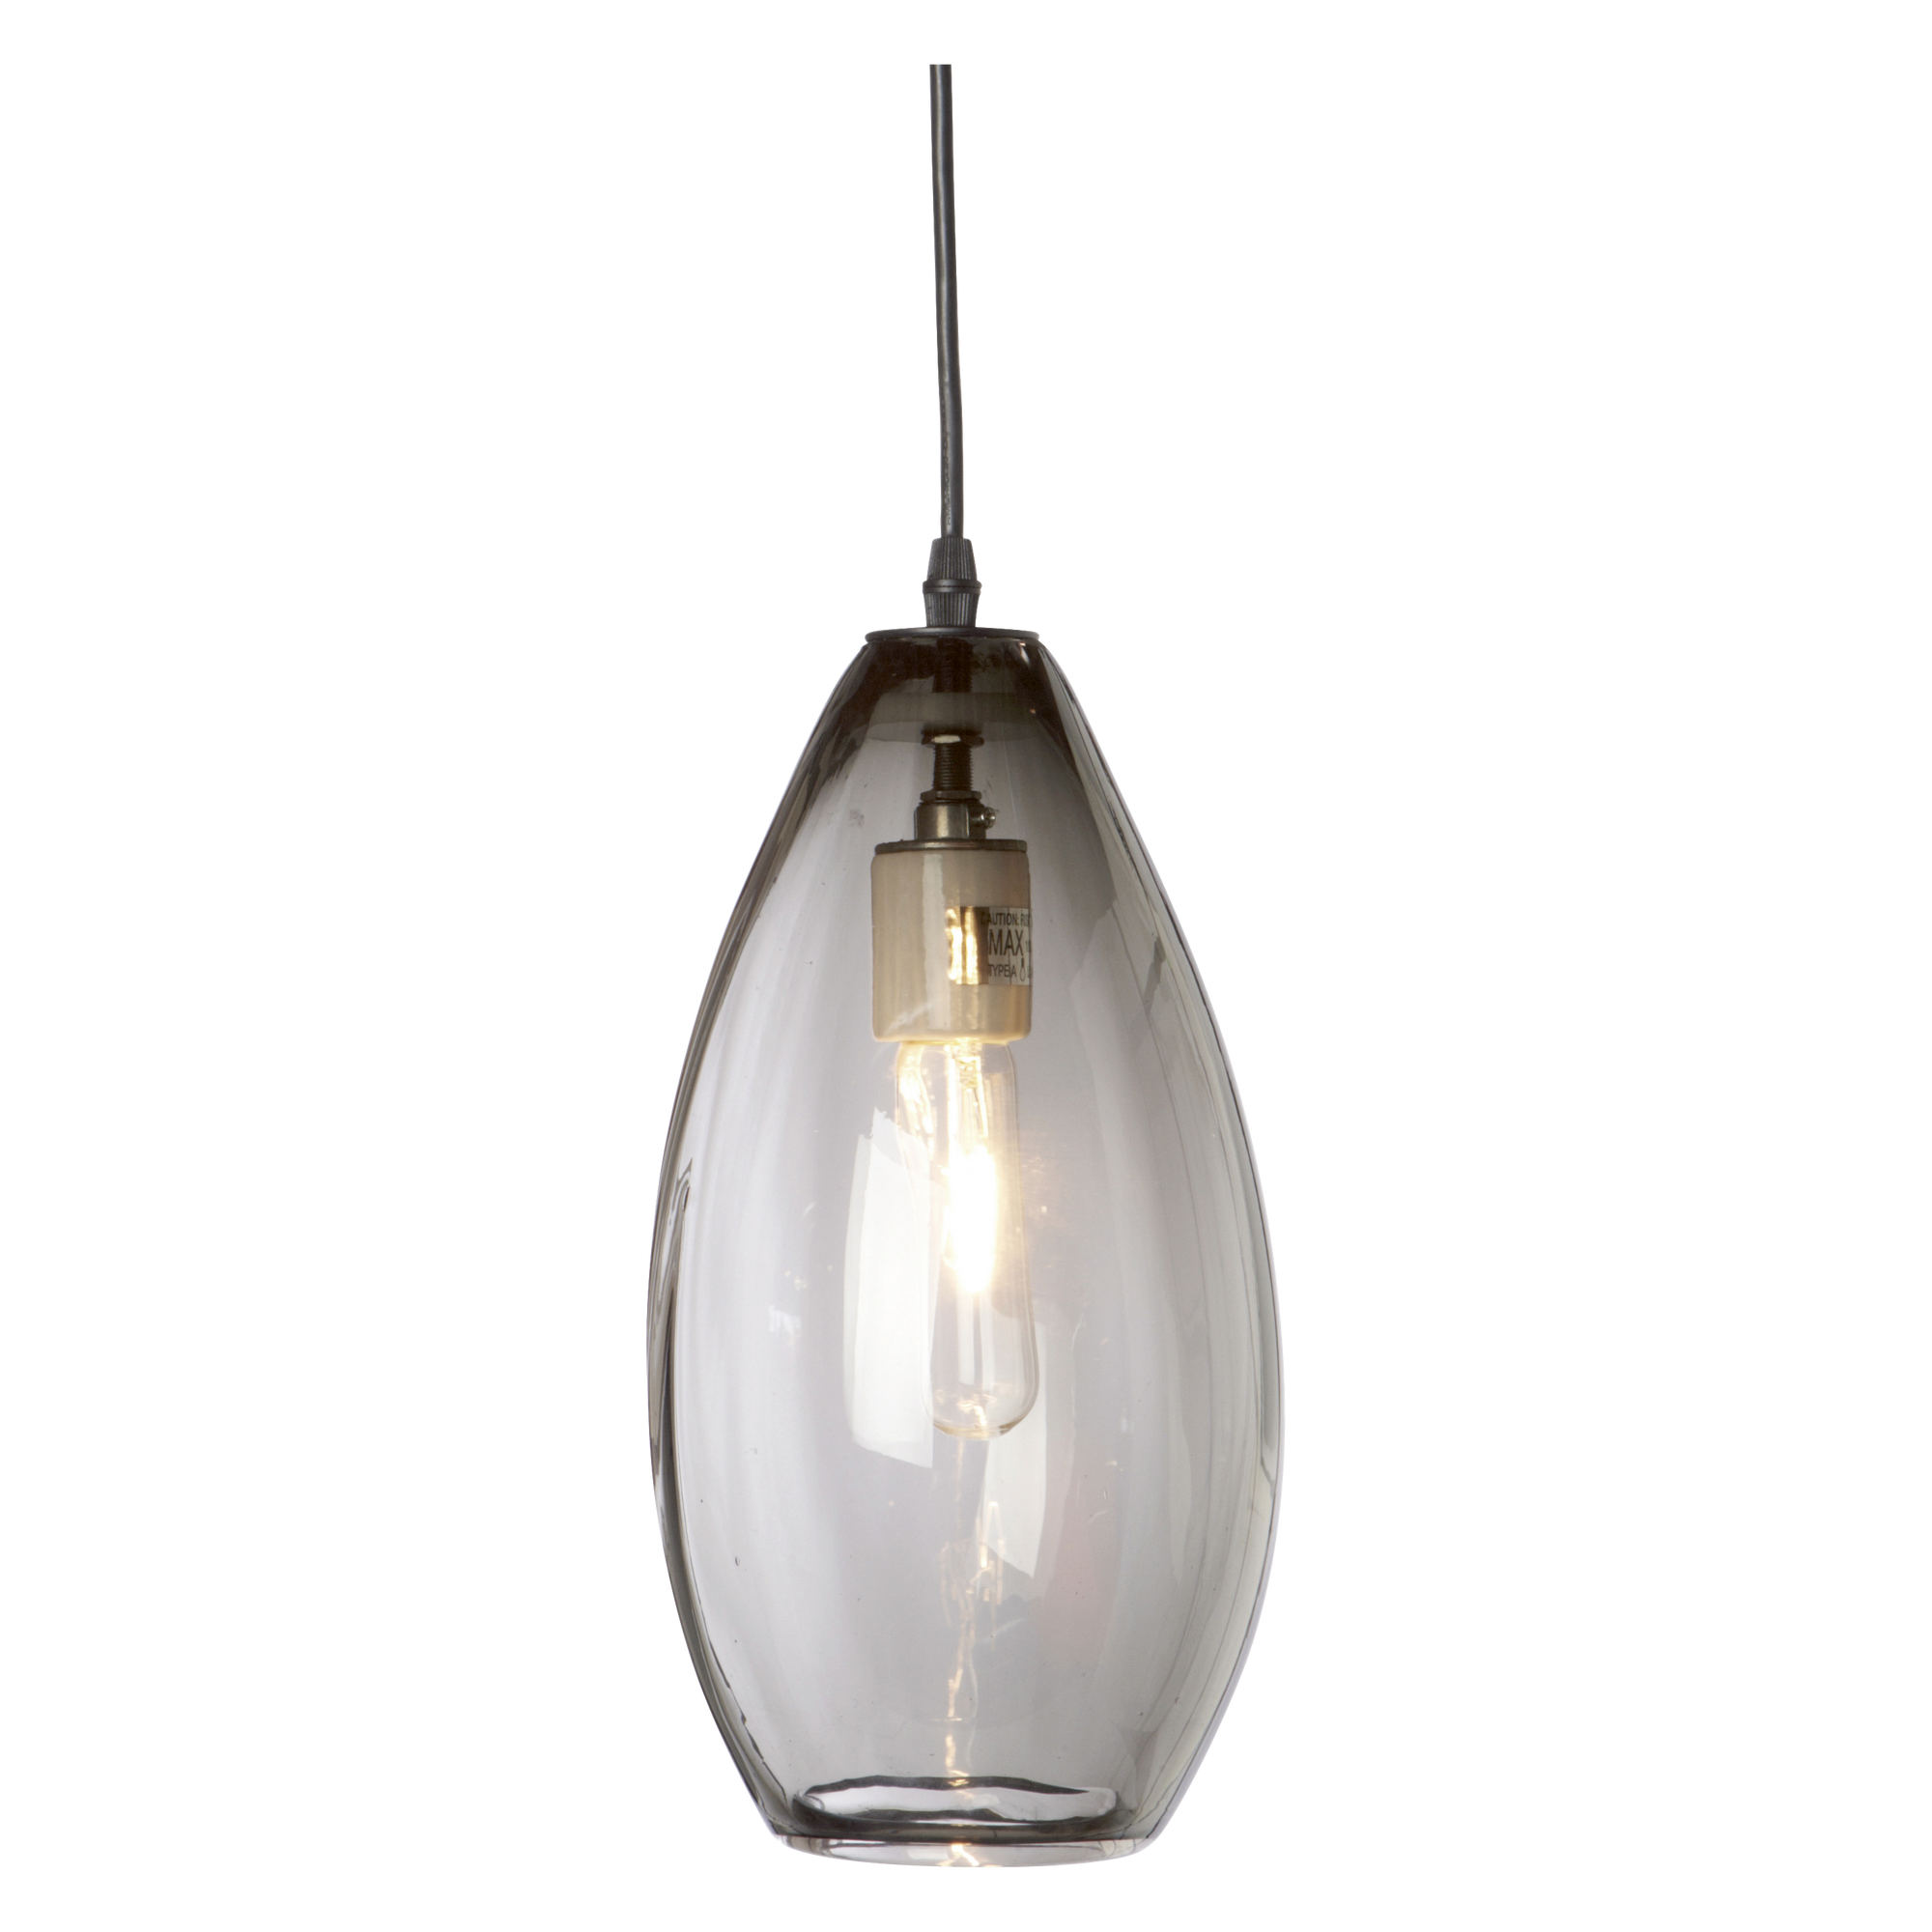 A modern pendant with a teardrop shaped smoked glass shade.